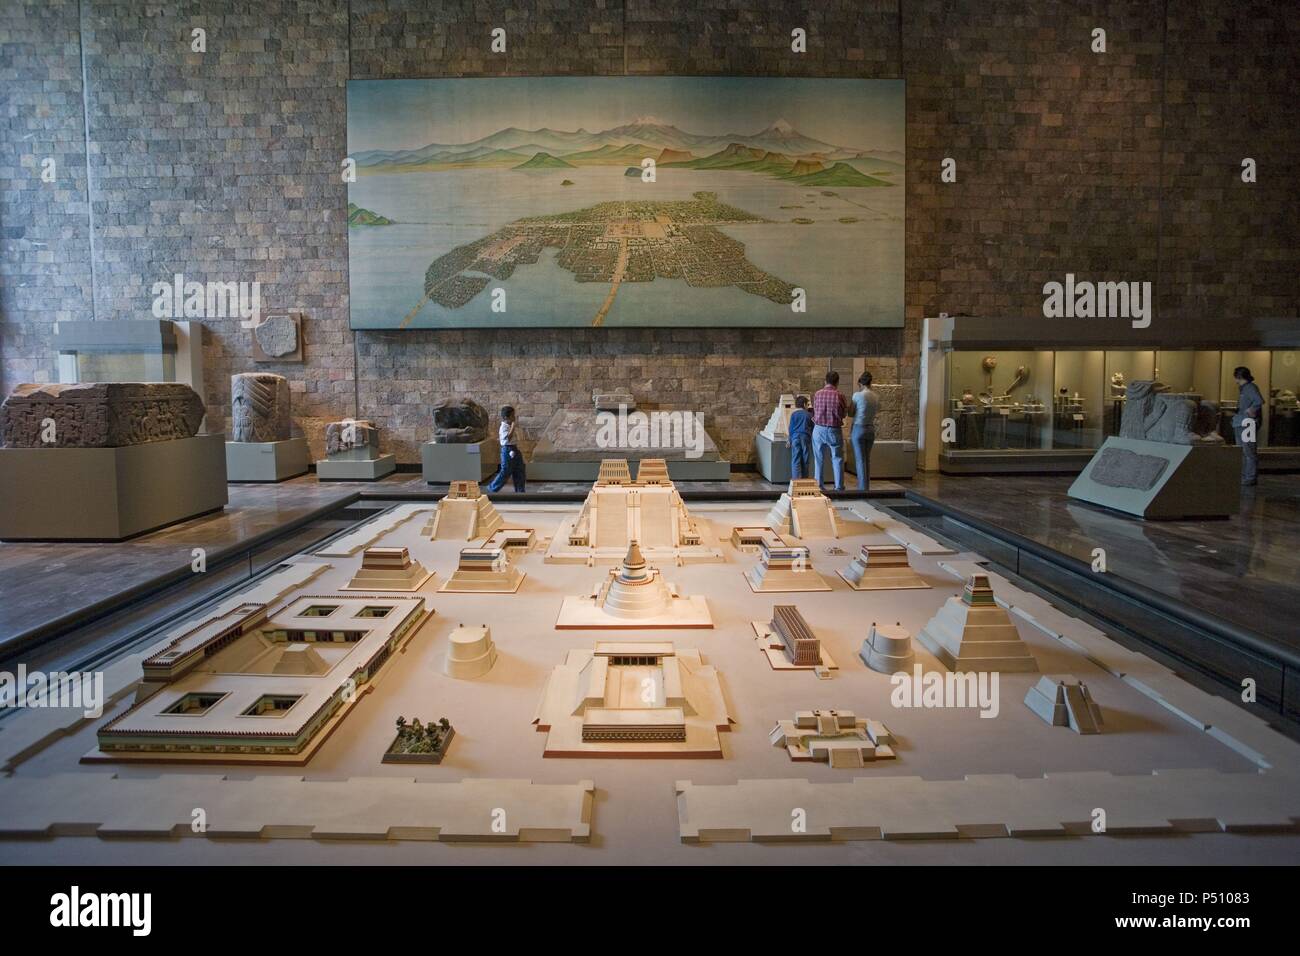 Mural and model of Tenochtitlan city. National Museum of Anthropology. Mexico City, Mexico. Stock Photo